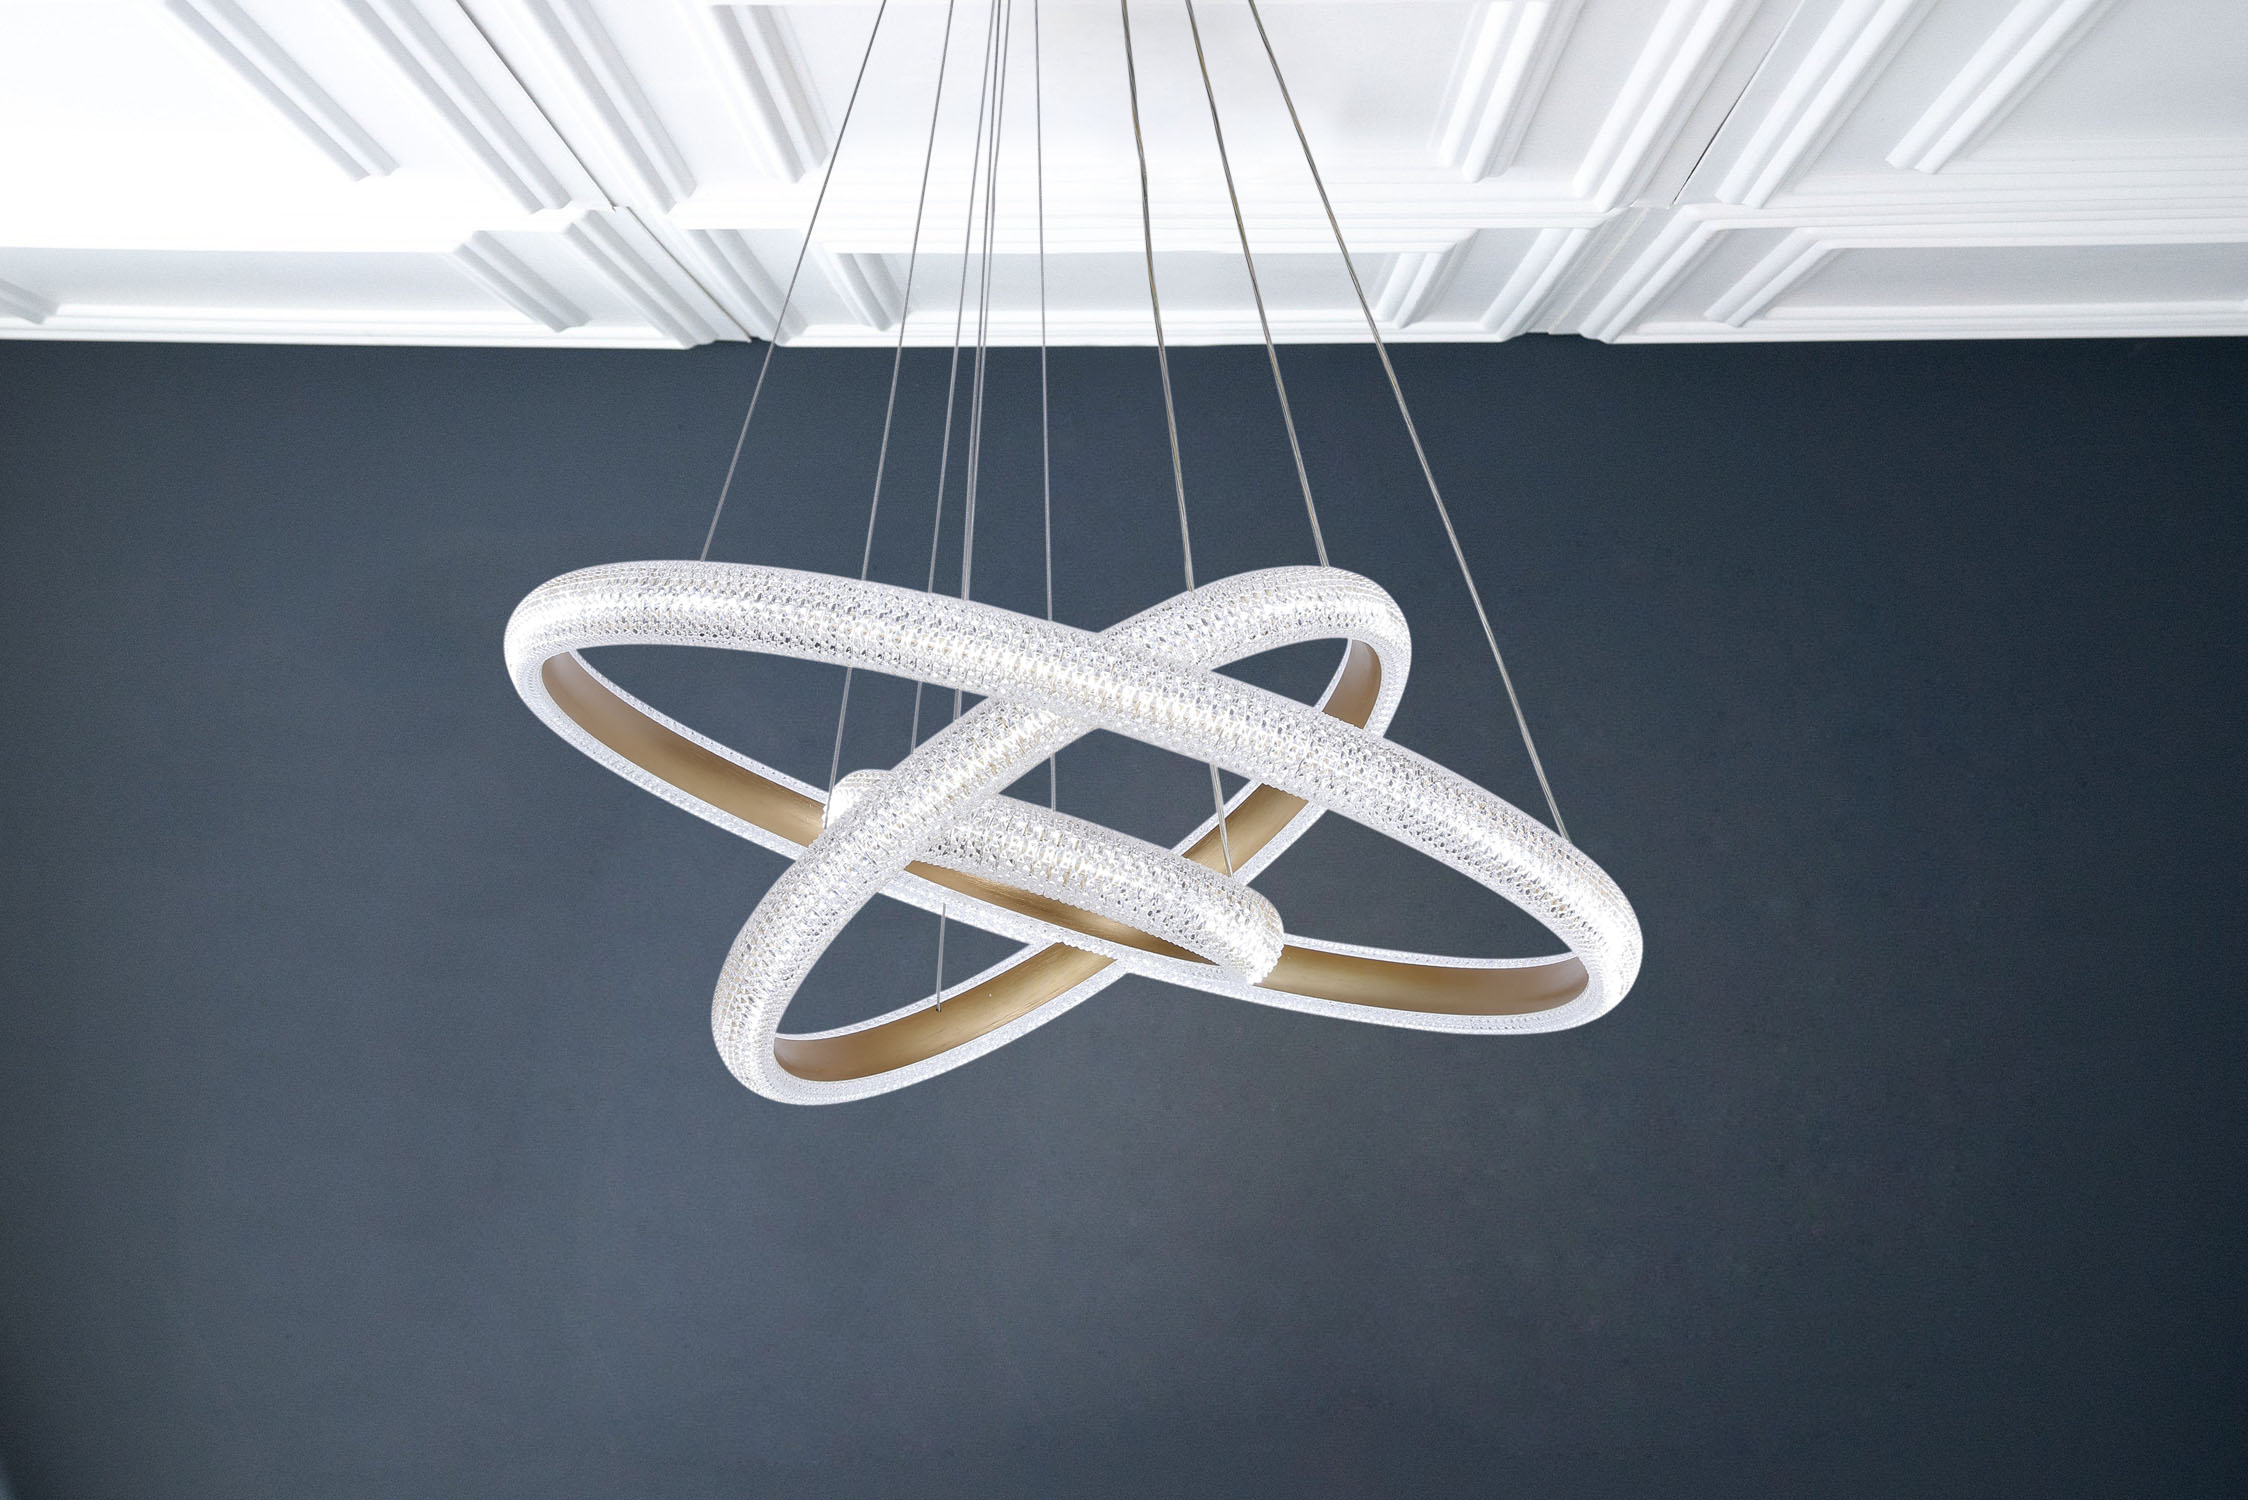 Rated Dry at Modern/Contemporary Aiwen Aluminium 3-Light Chandelier